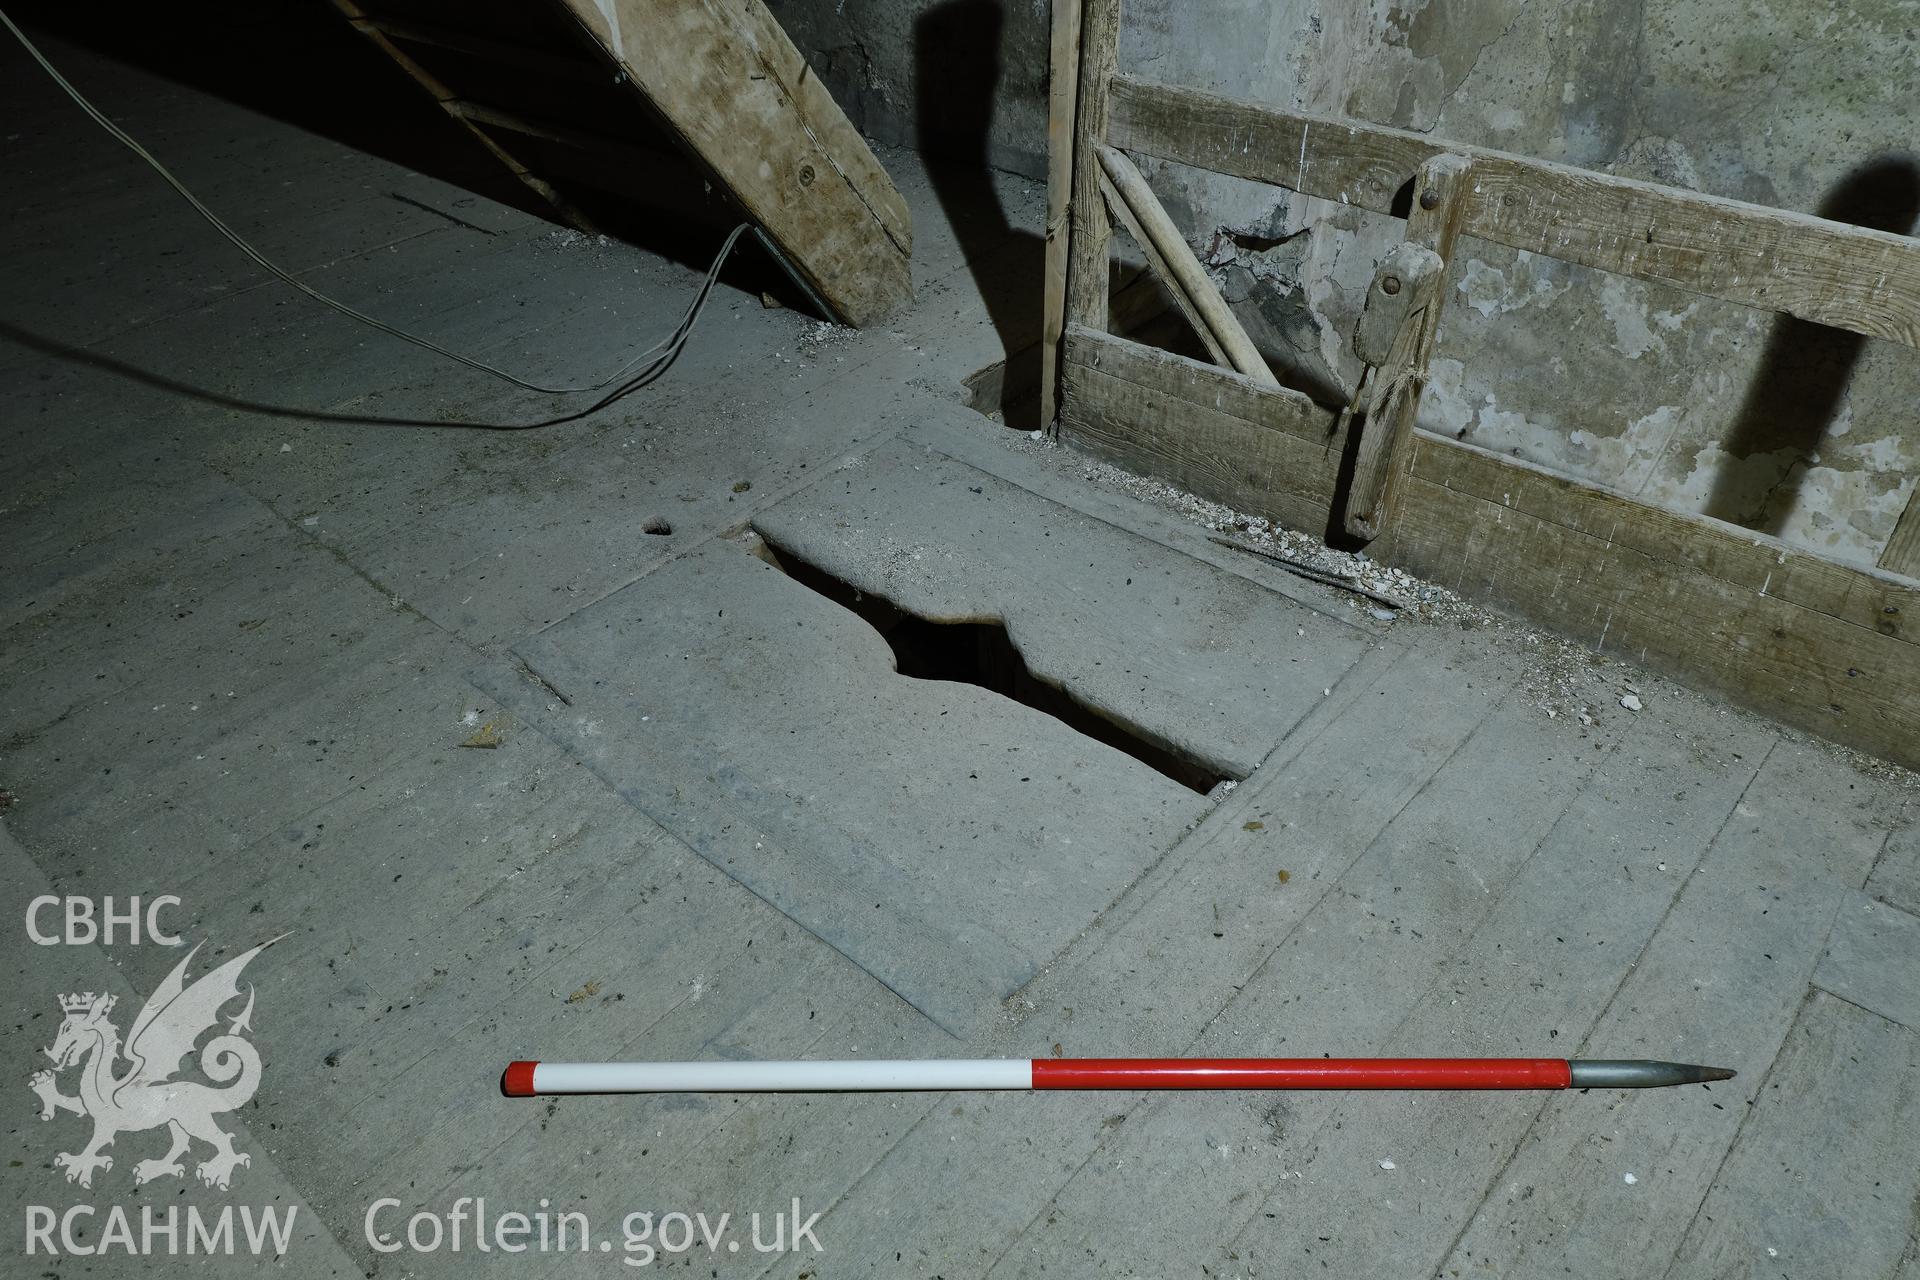 Colour photograph showing Blackpool Mill - 3rd floor, floor hatch by stairs, looking SE. Produced as part of Historic Building Recording for Blackpool Mill, carried out by Richard Hayman, June 2021.